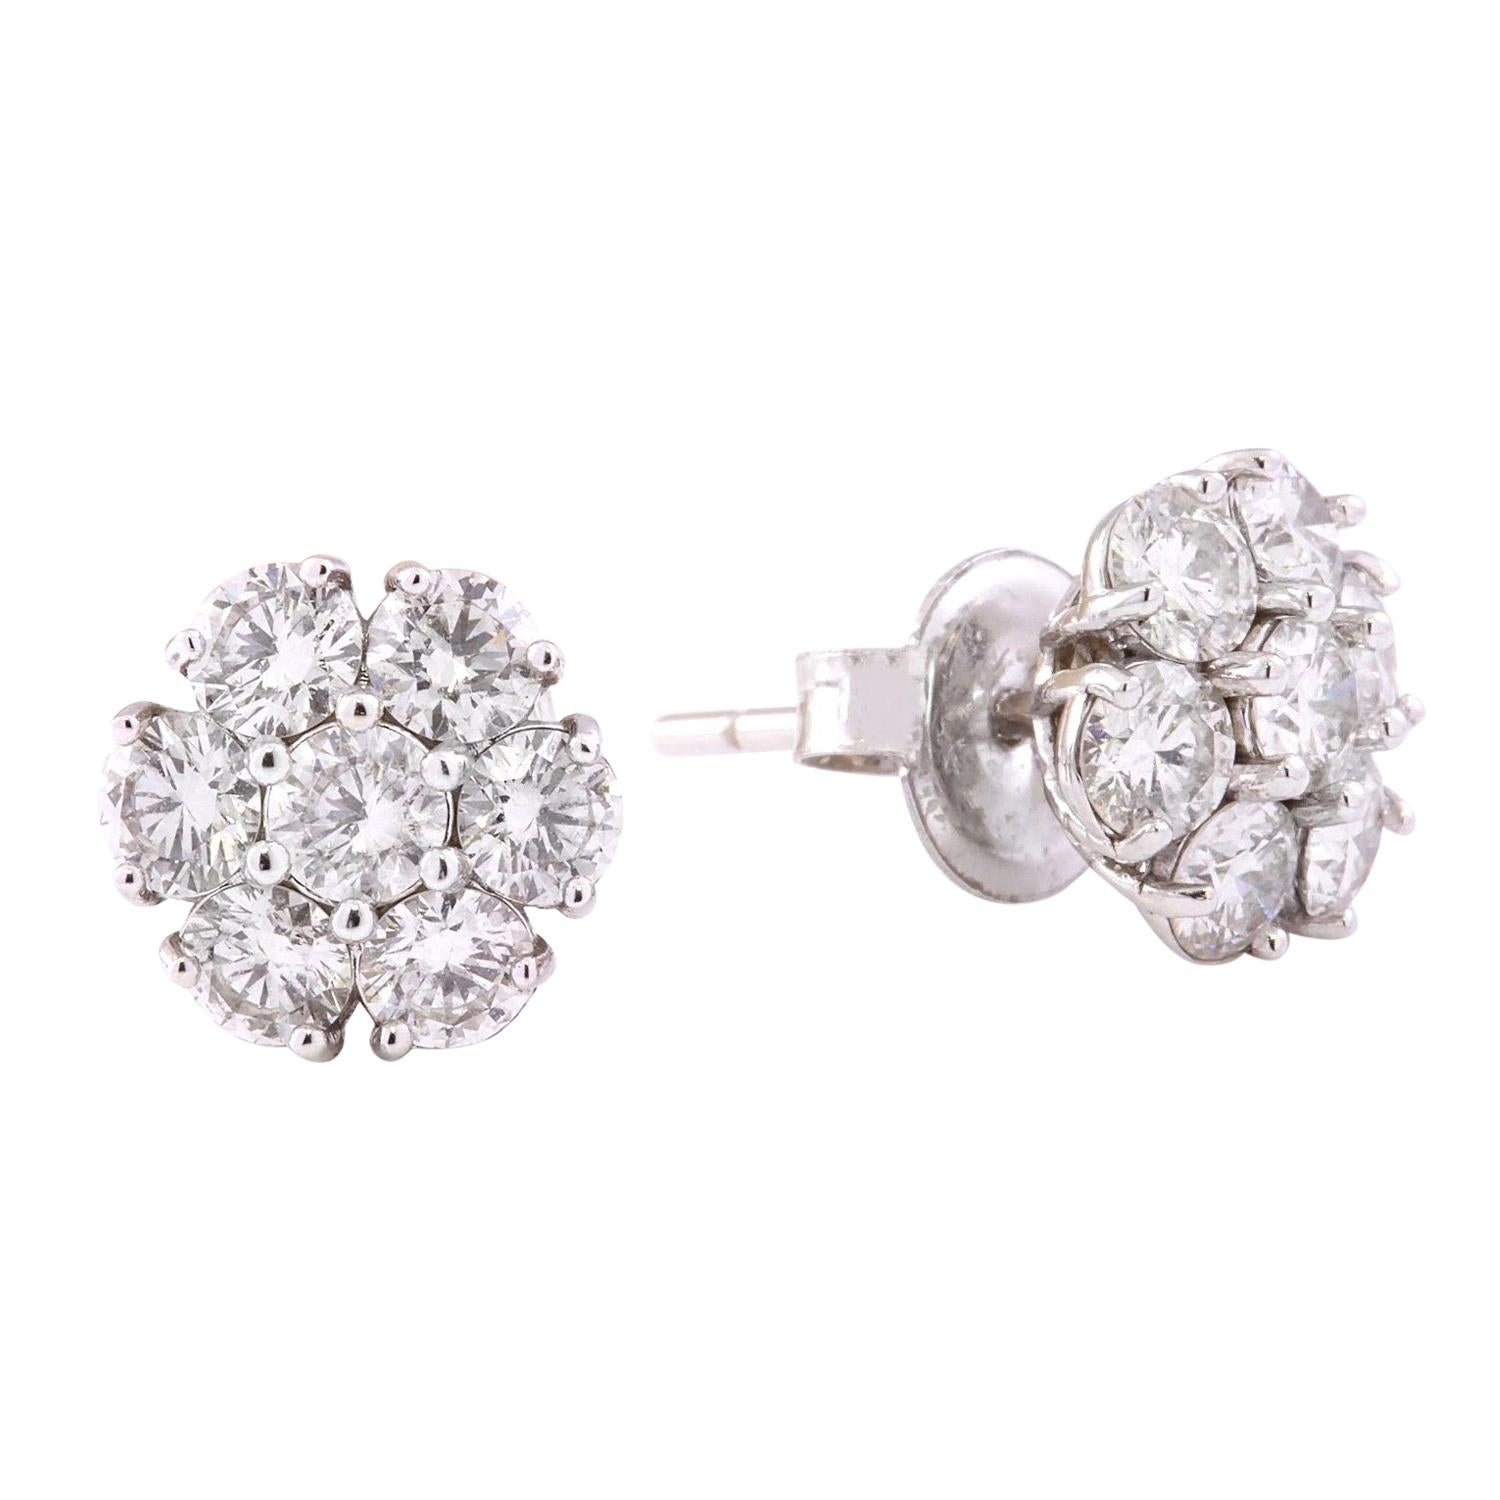 Elevate your elegance with these exquisite 3.00 Carat Diamond Stud Earrings, crafted in luxurious 14K Solid White Gold. Each detail of these stunning earrings exudes sophistication and refinement, making them the perfect accessory for any